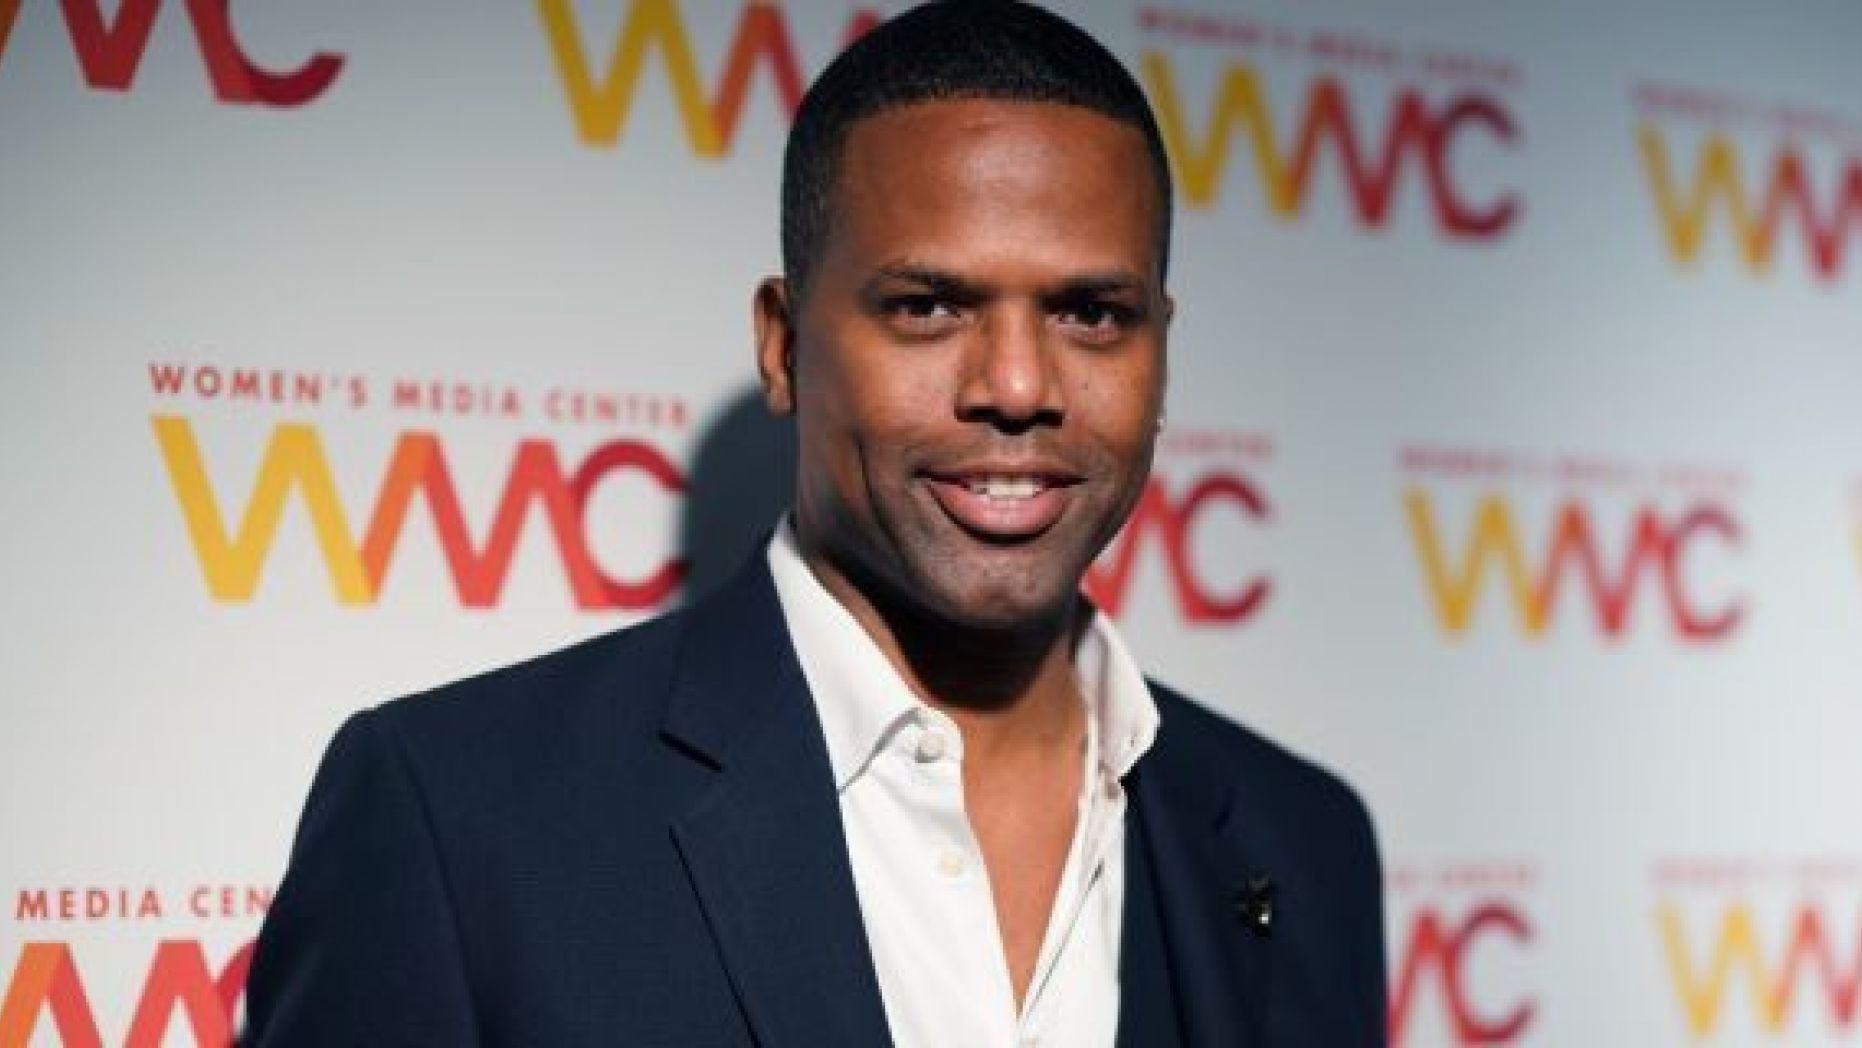 A.J. Calloway attends the 2018 Women's Media Awards in New York on Nov. 1. (Photo by Jemal Countess/Getty Images for Women's Media Center)